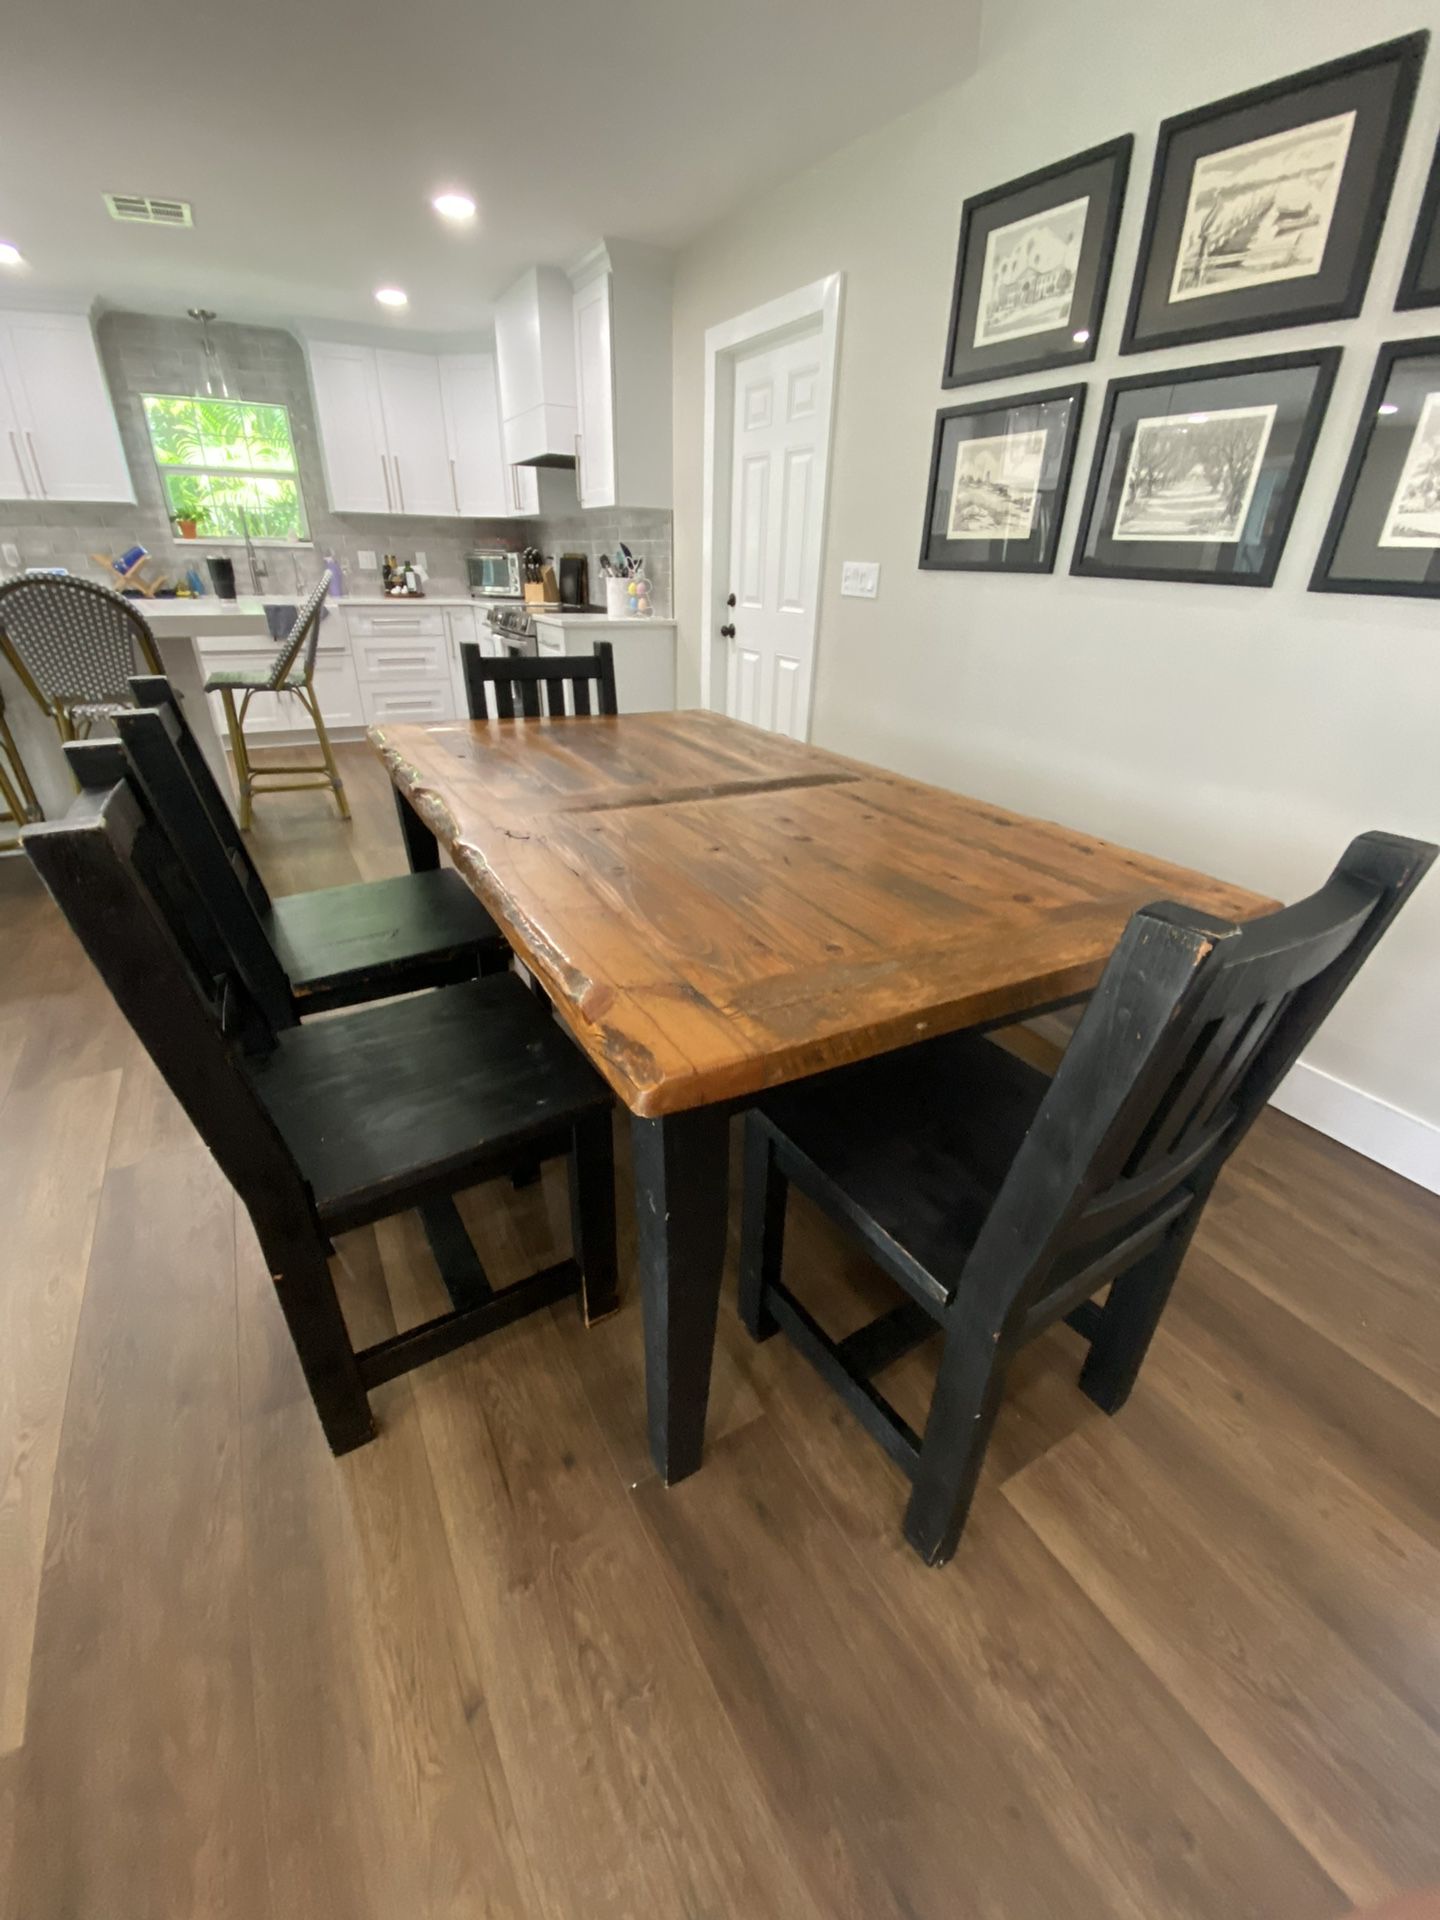 Rustic farmhouse Dining Room Table, Four Chairs, Bench